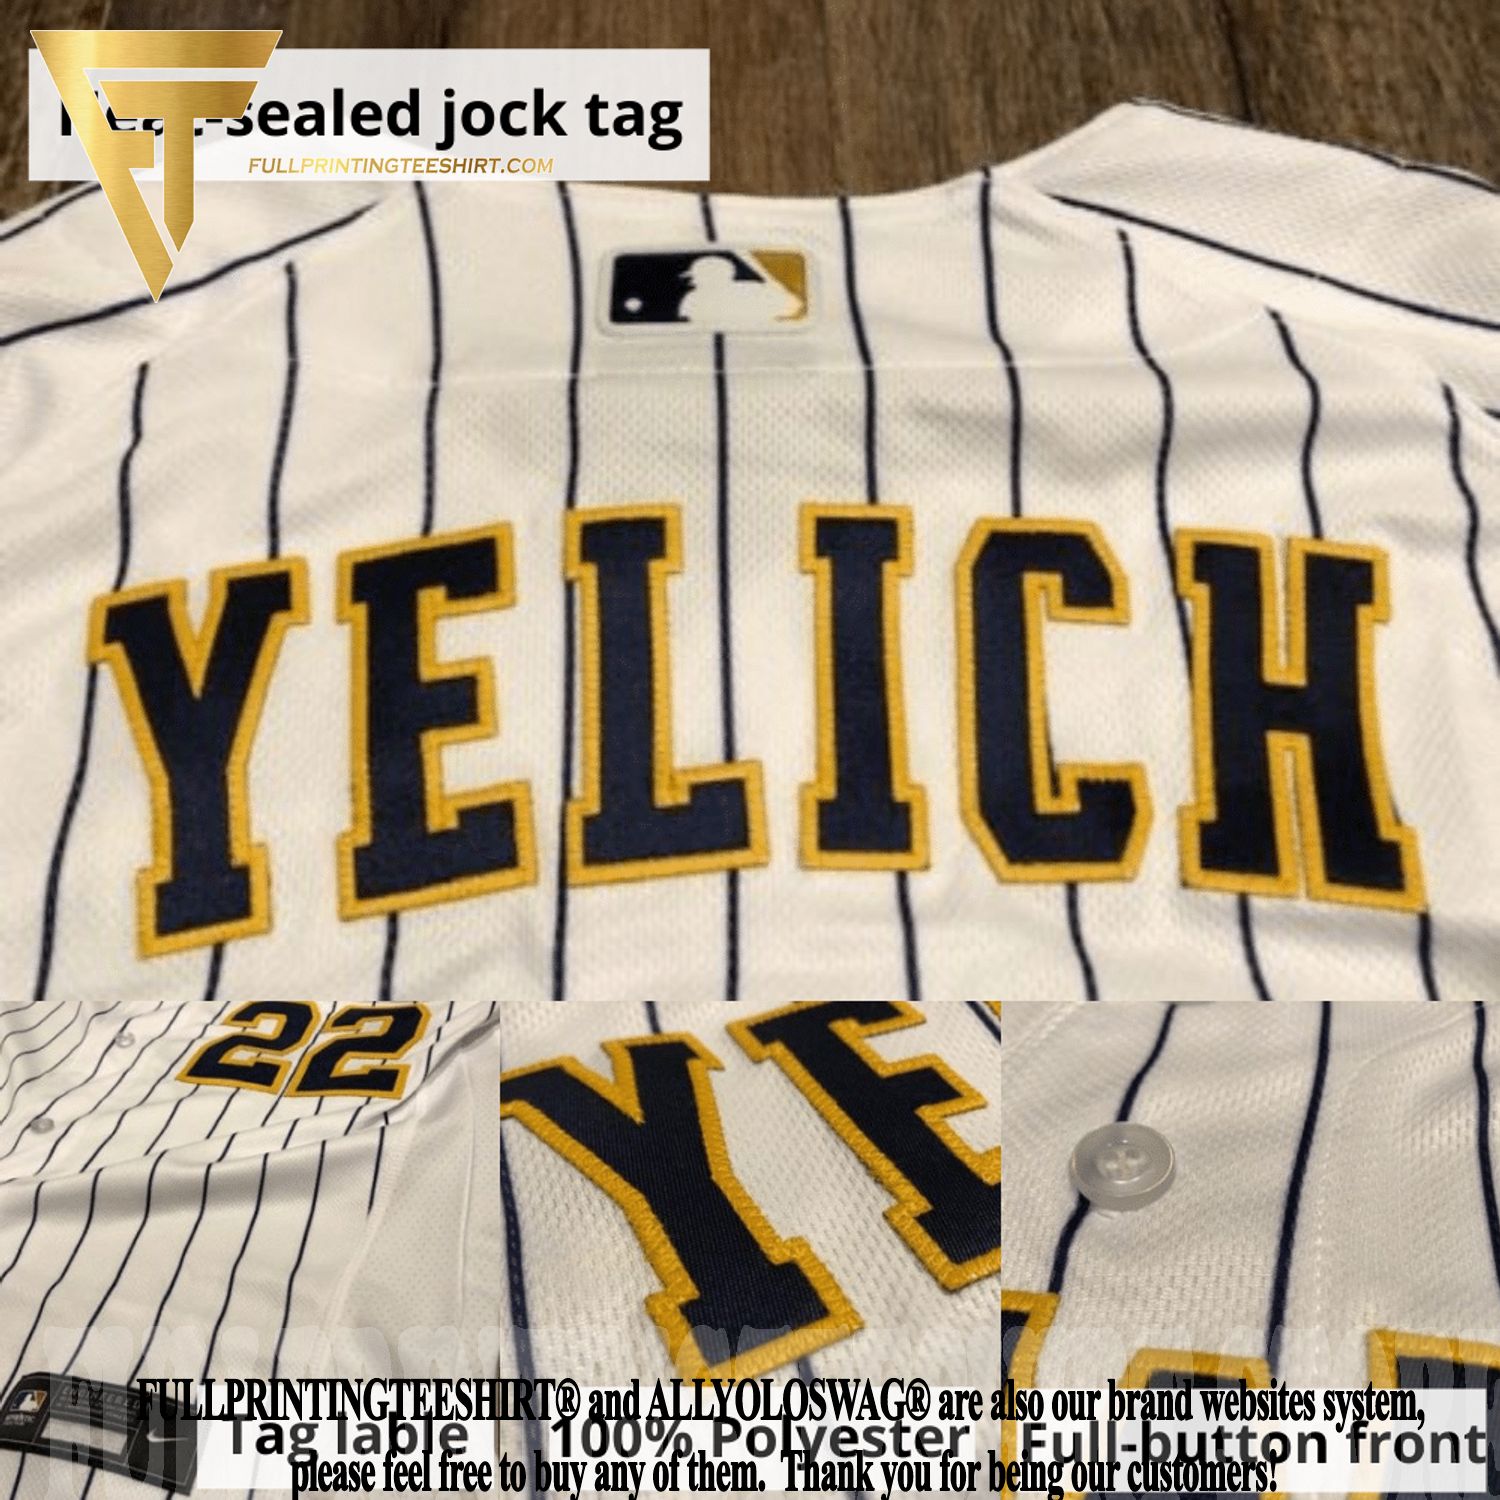 dodgers gold authentic jersey